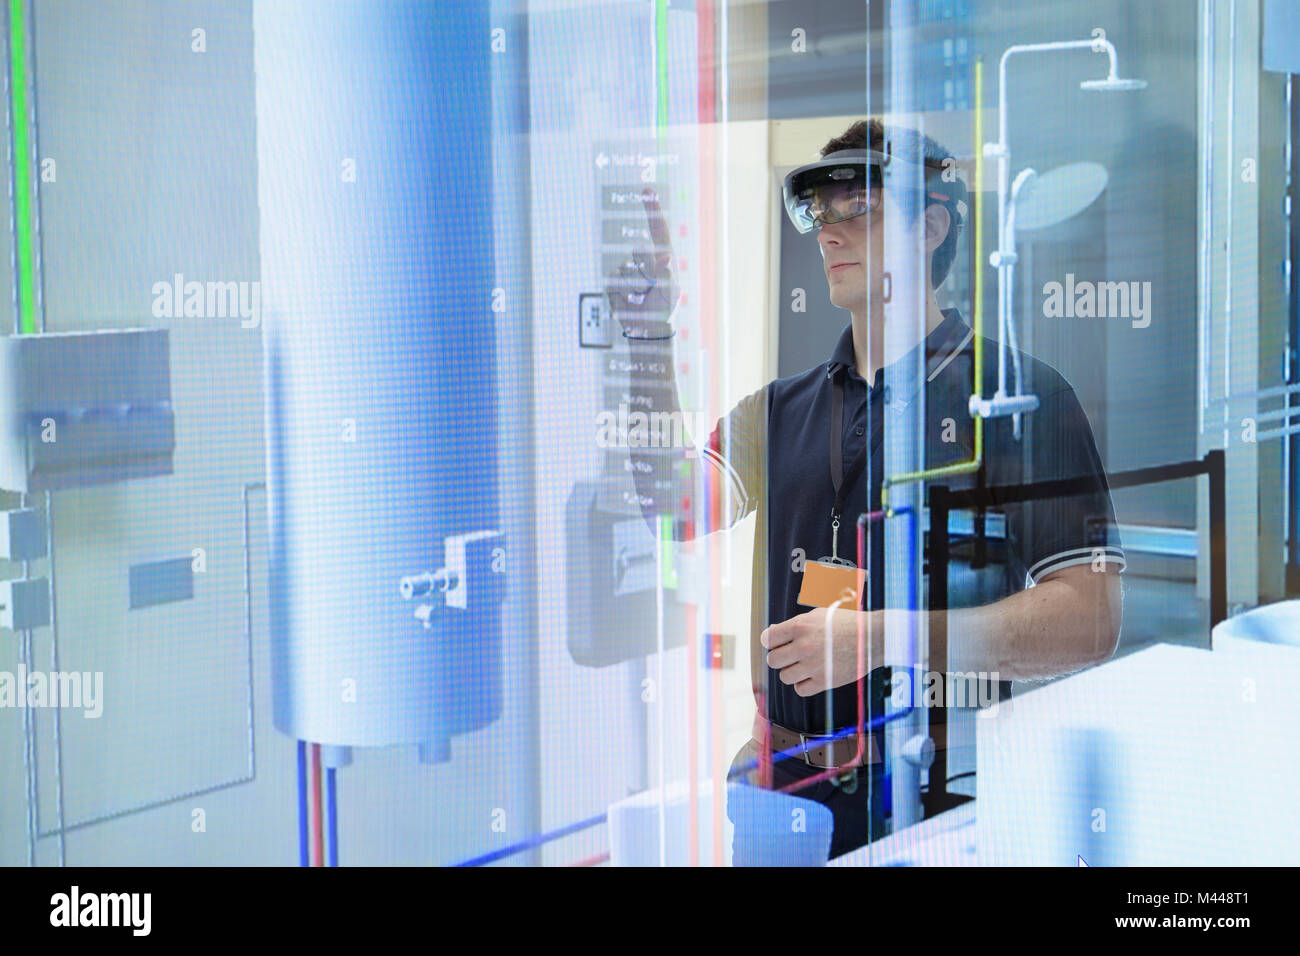 Engineer using augmented reality headset to 'see' utilities through walls in robotics research facility Stock Photo